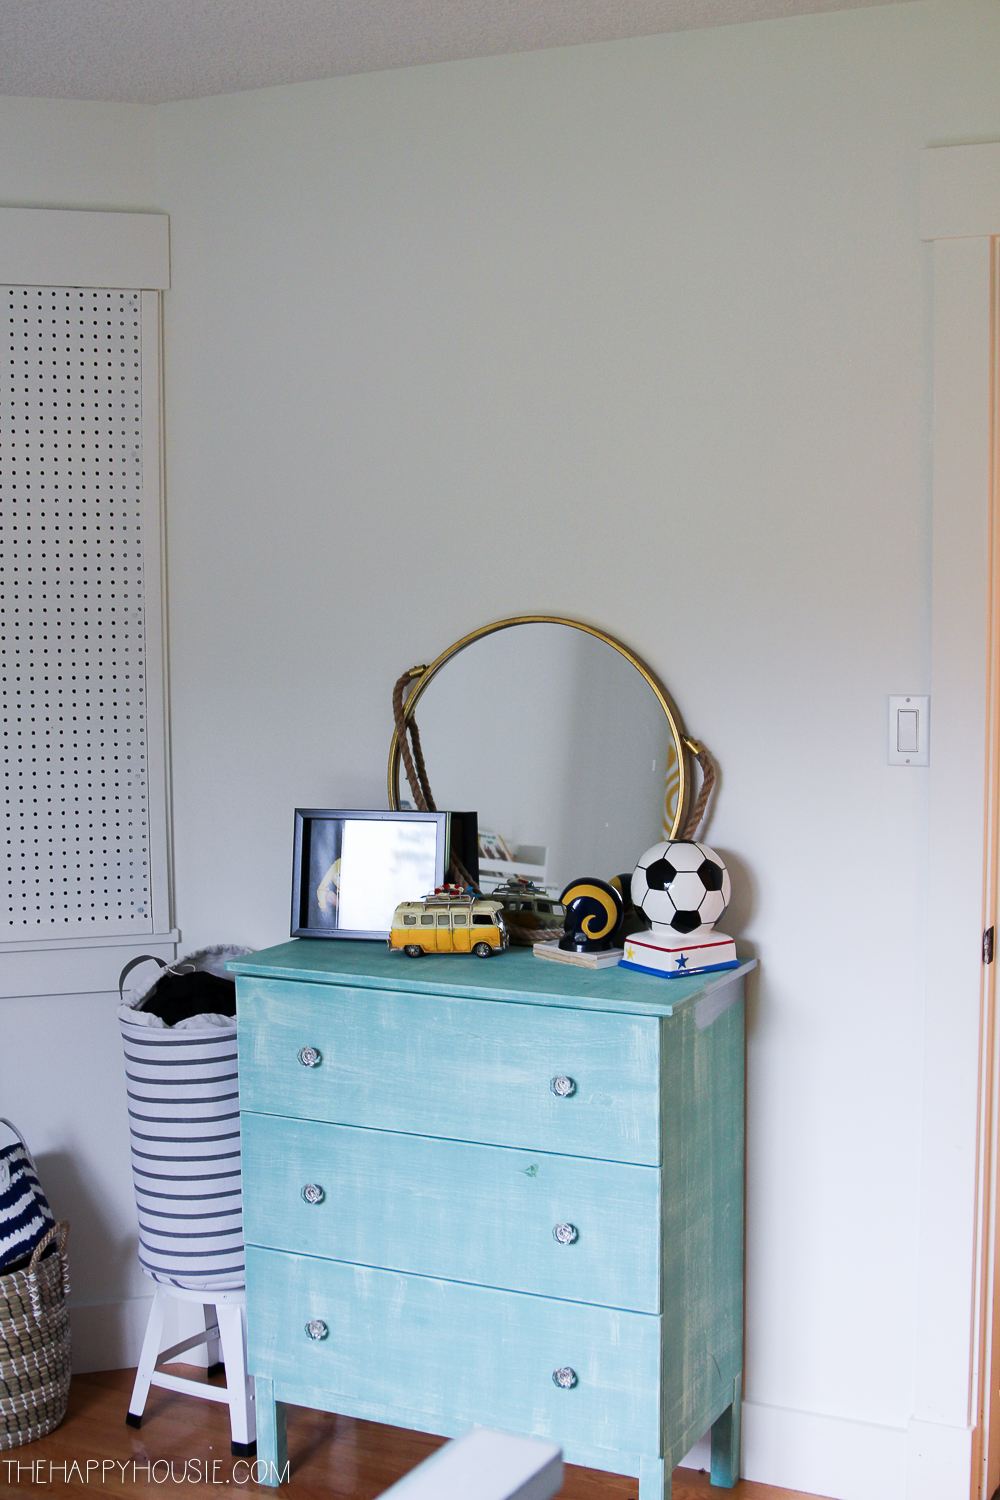 An aqua dresser has a round gold mirror on it and a small soccer trophy.